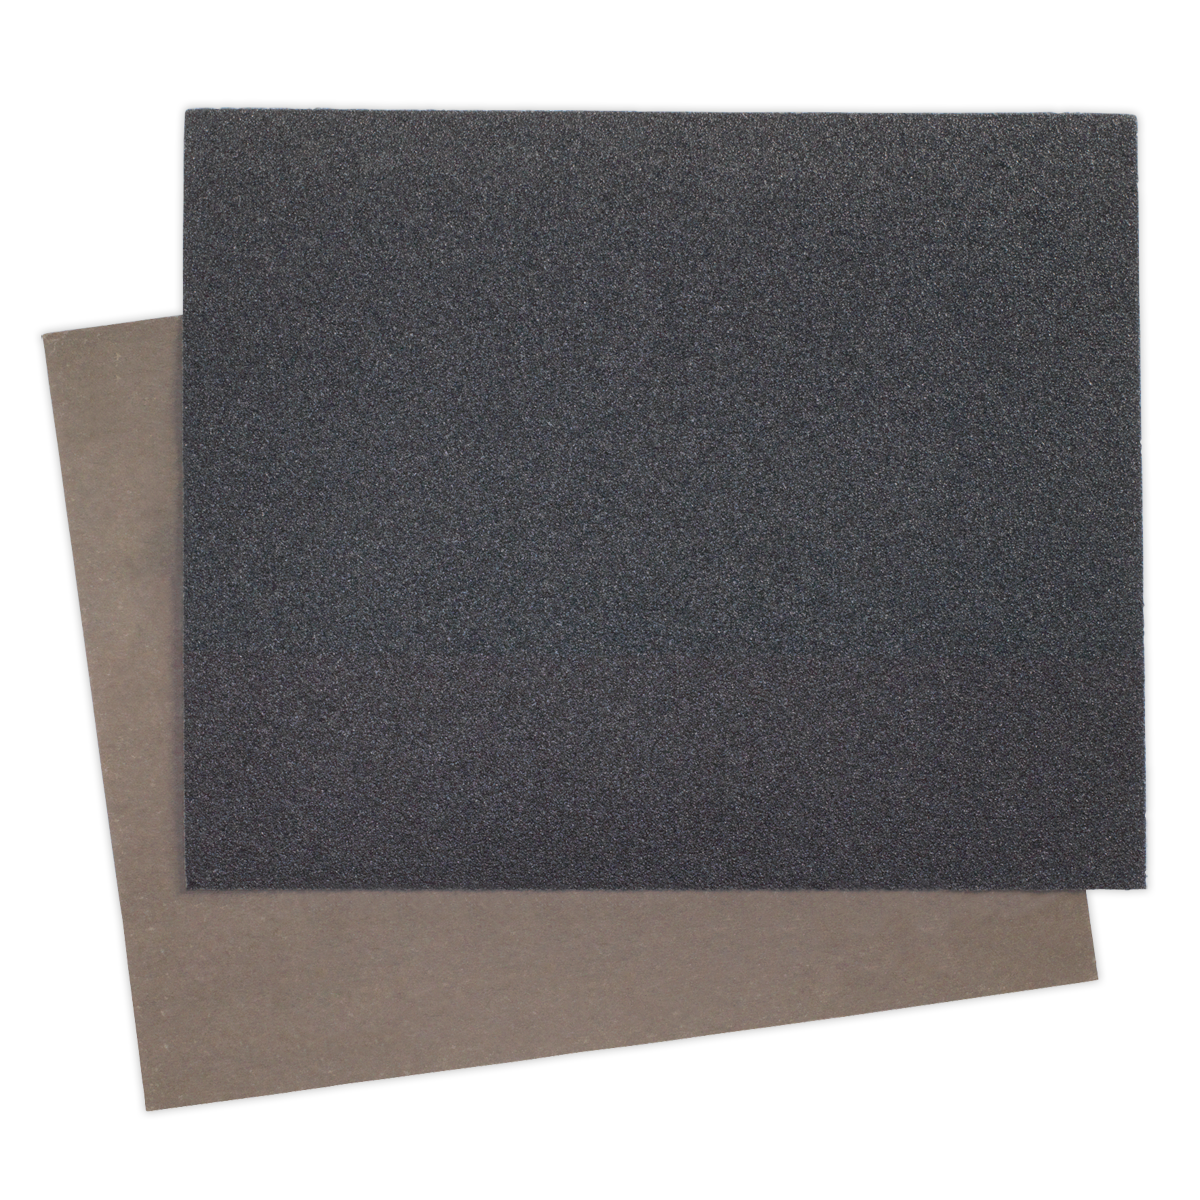 Sealey Wet & Dry Paper 230 x 280mm 400Grit Pack of 25